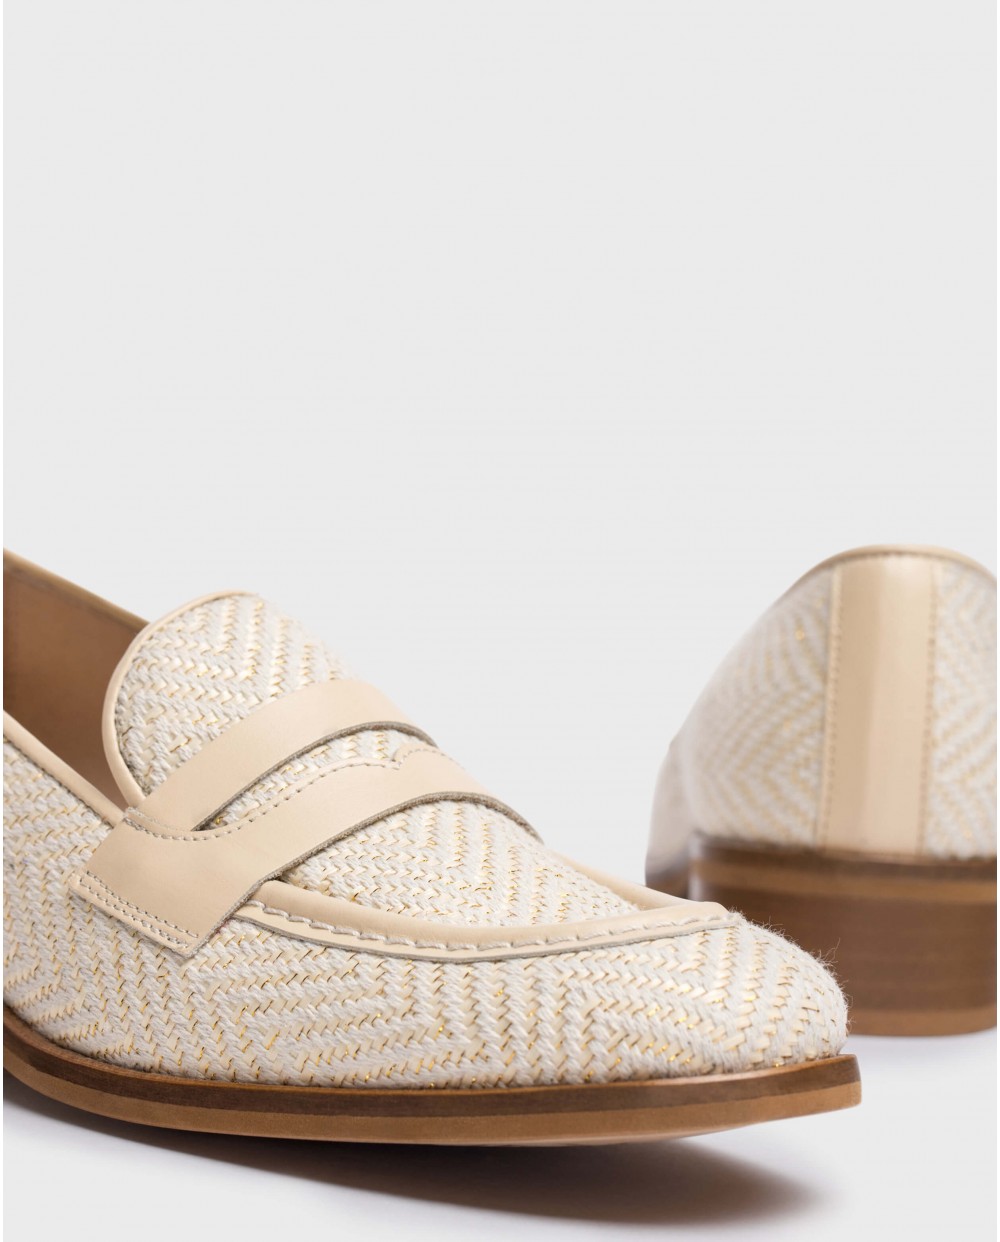 Wonders-Loafers-Bicolor Moccasin